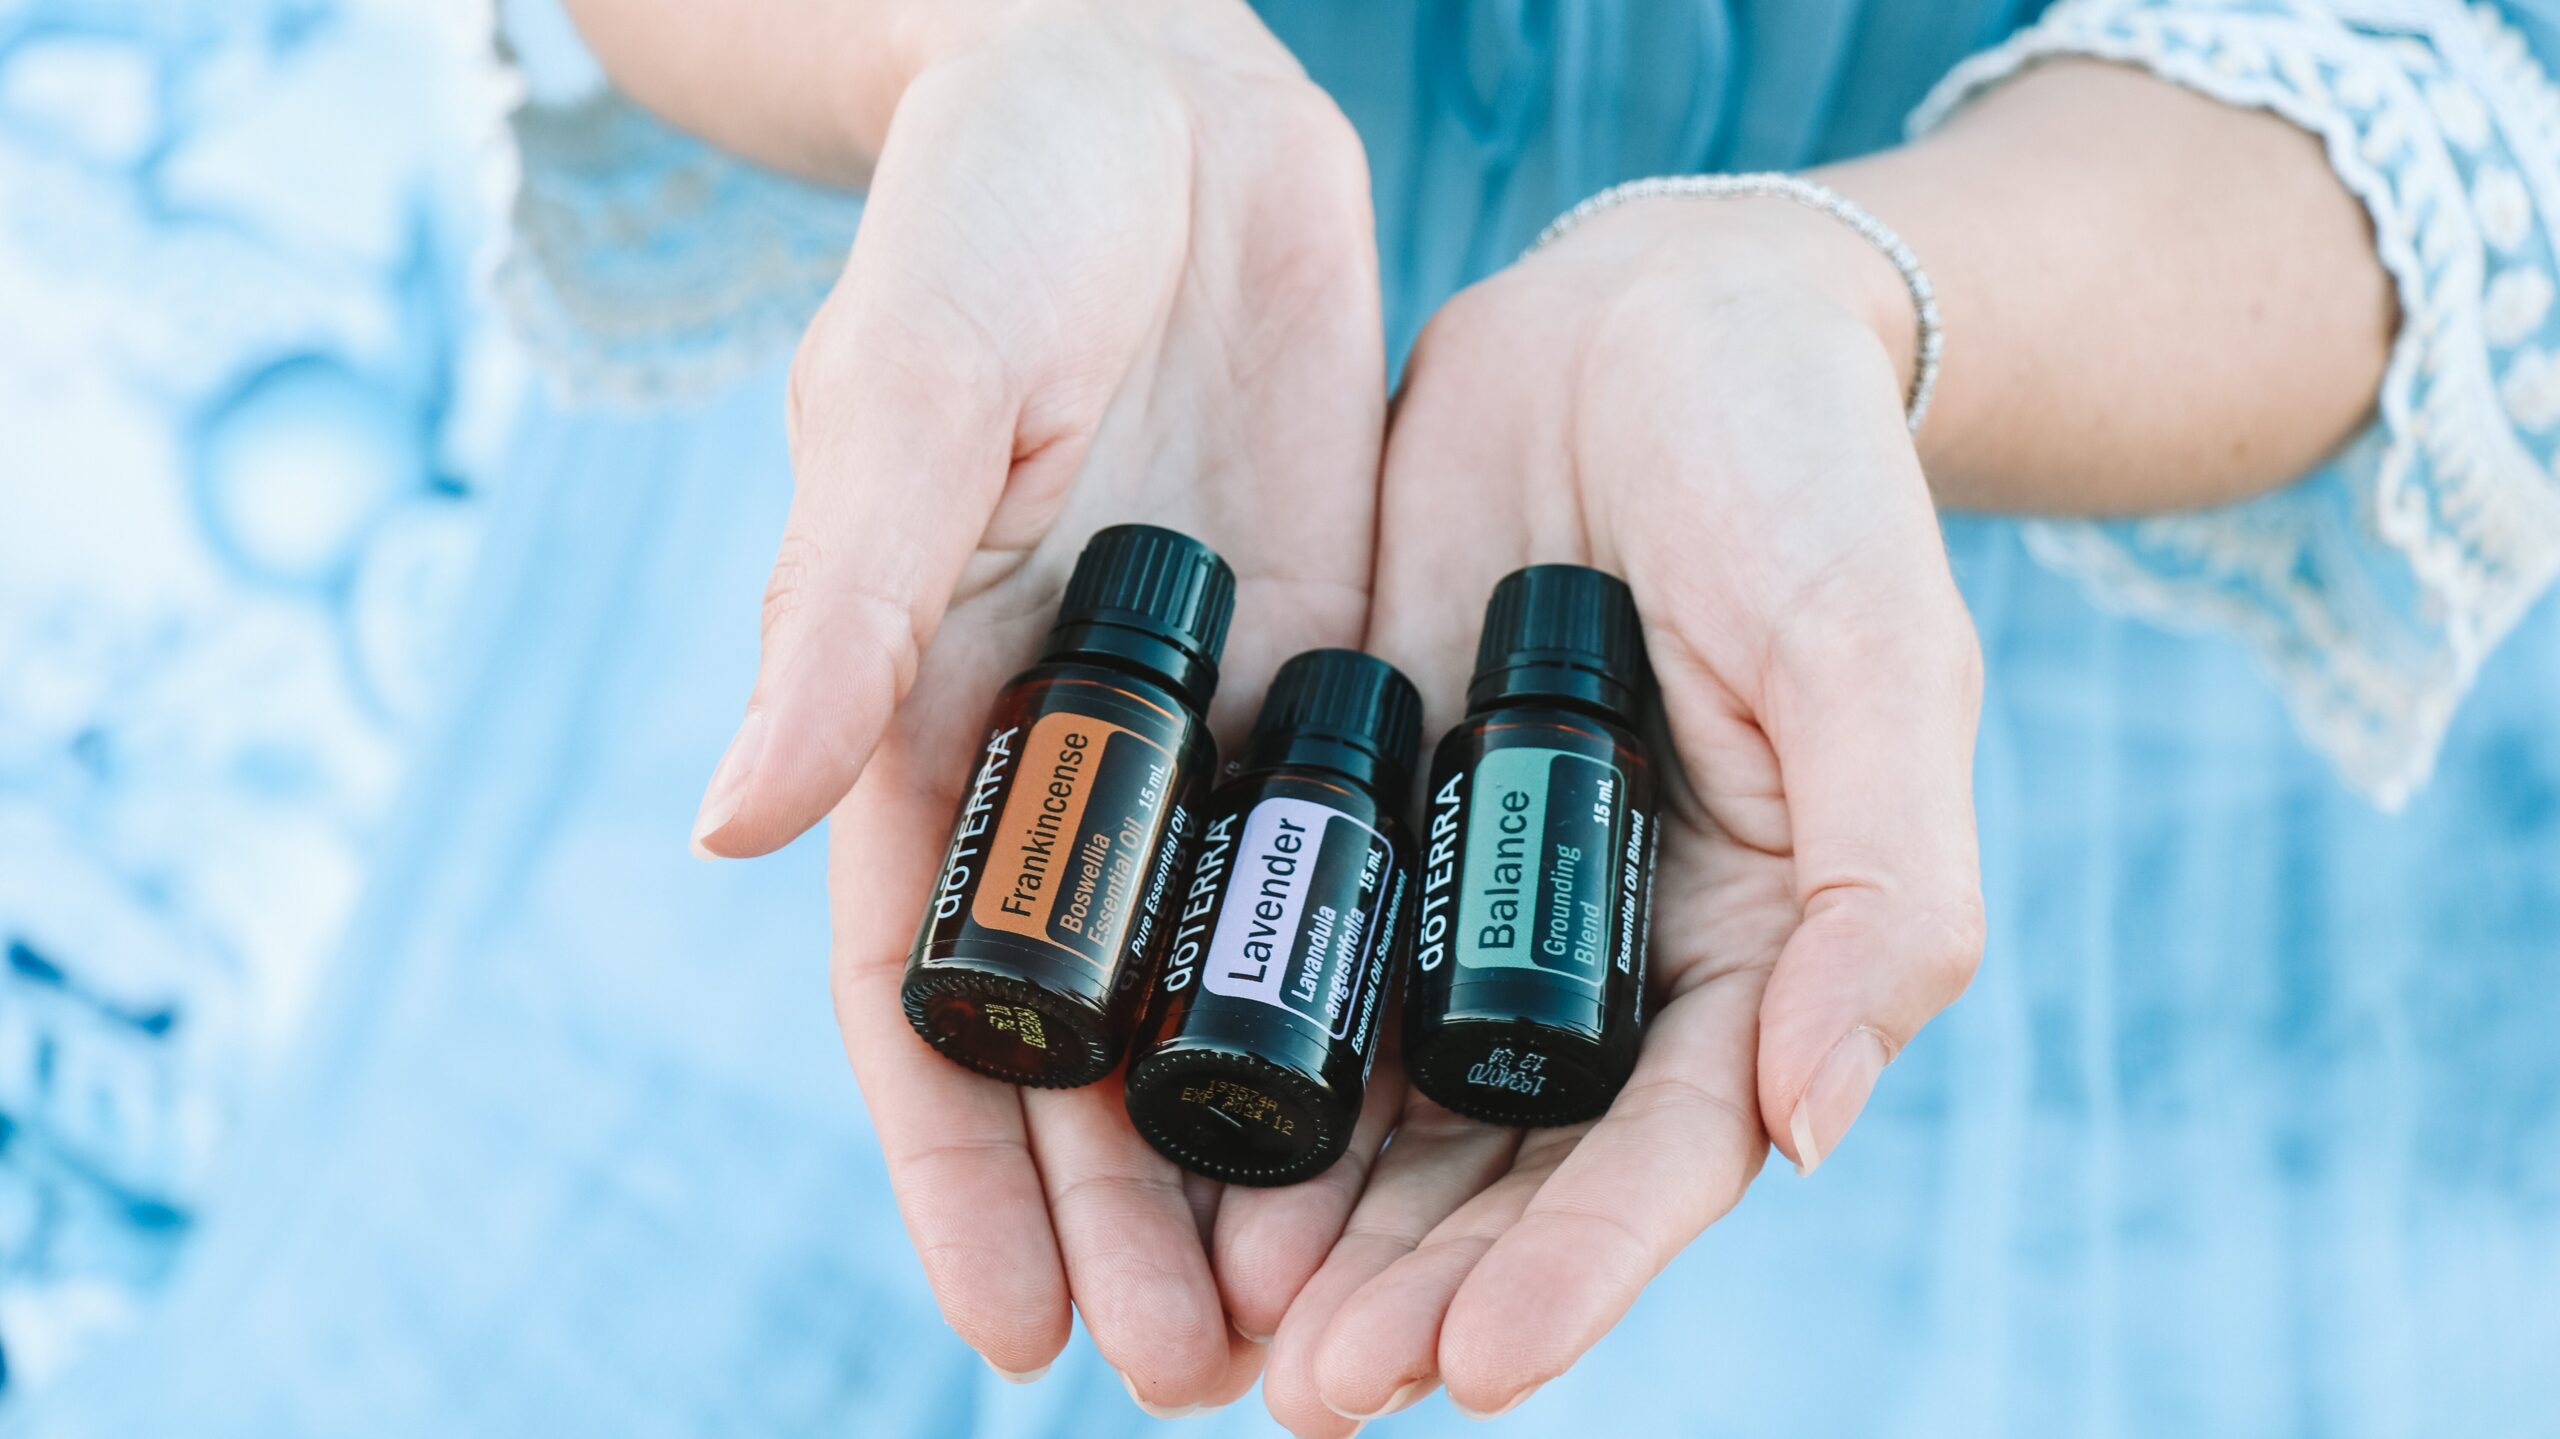 Hands holding a variety of essential oil bottles